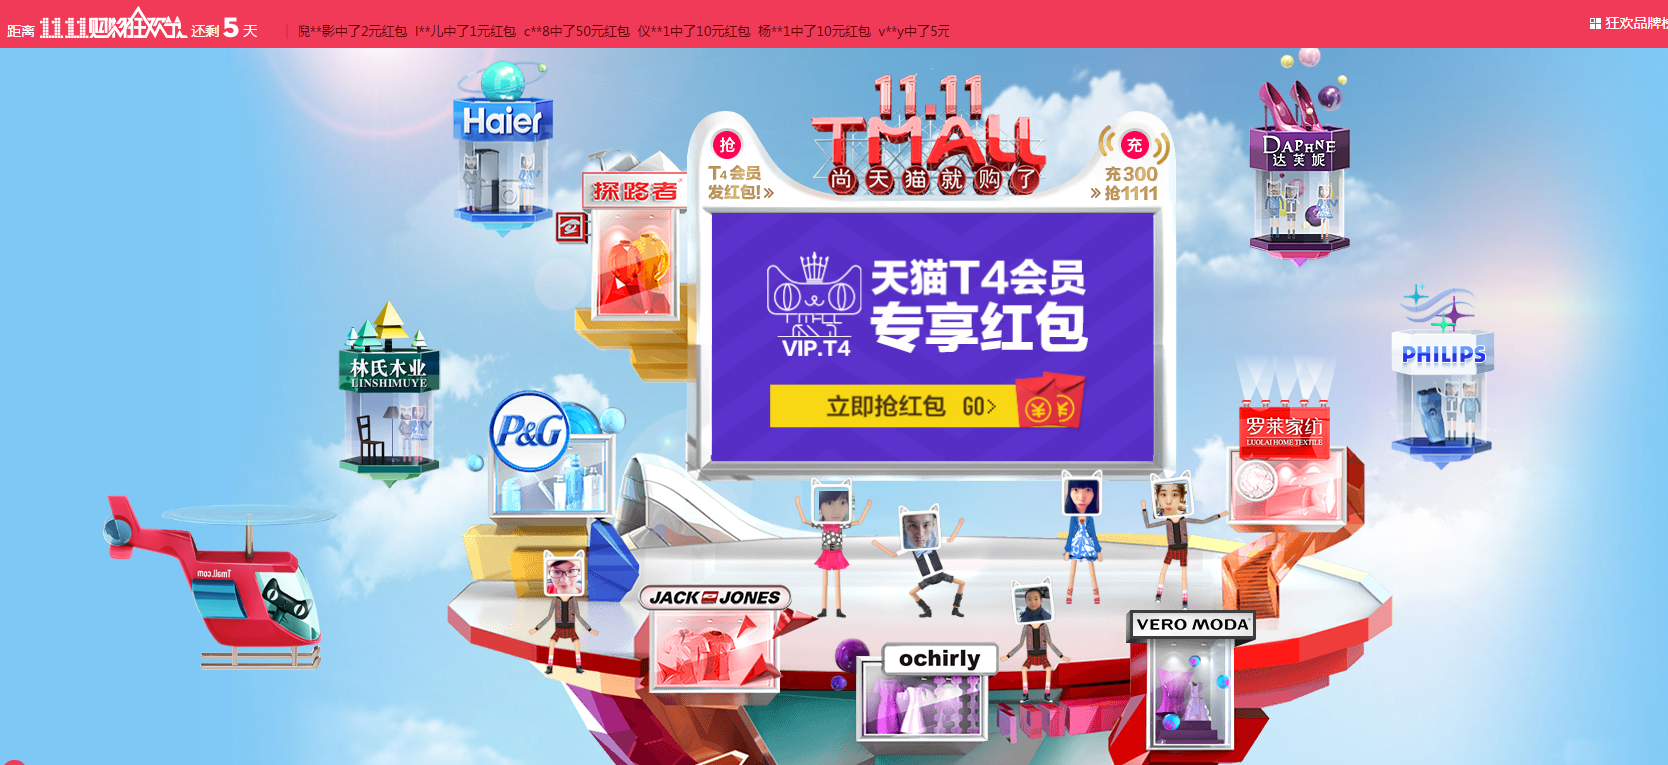 Alibaba's "Double Eleven" shopping page for this year. Photo: SCMP Pictures